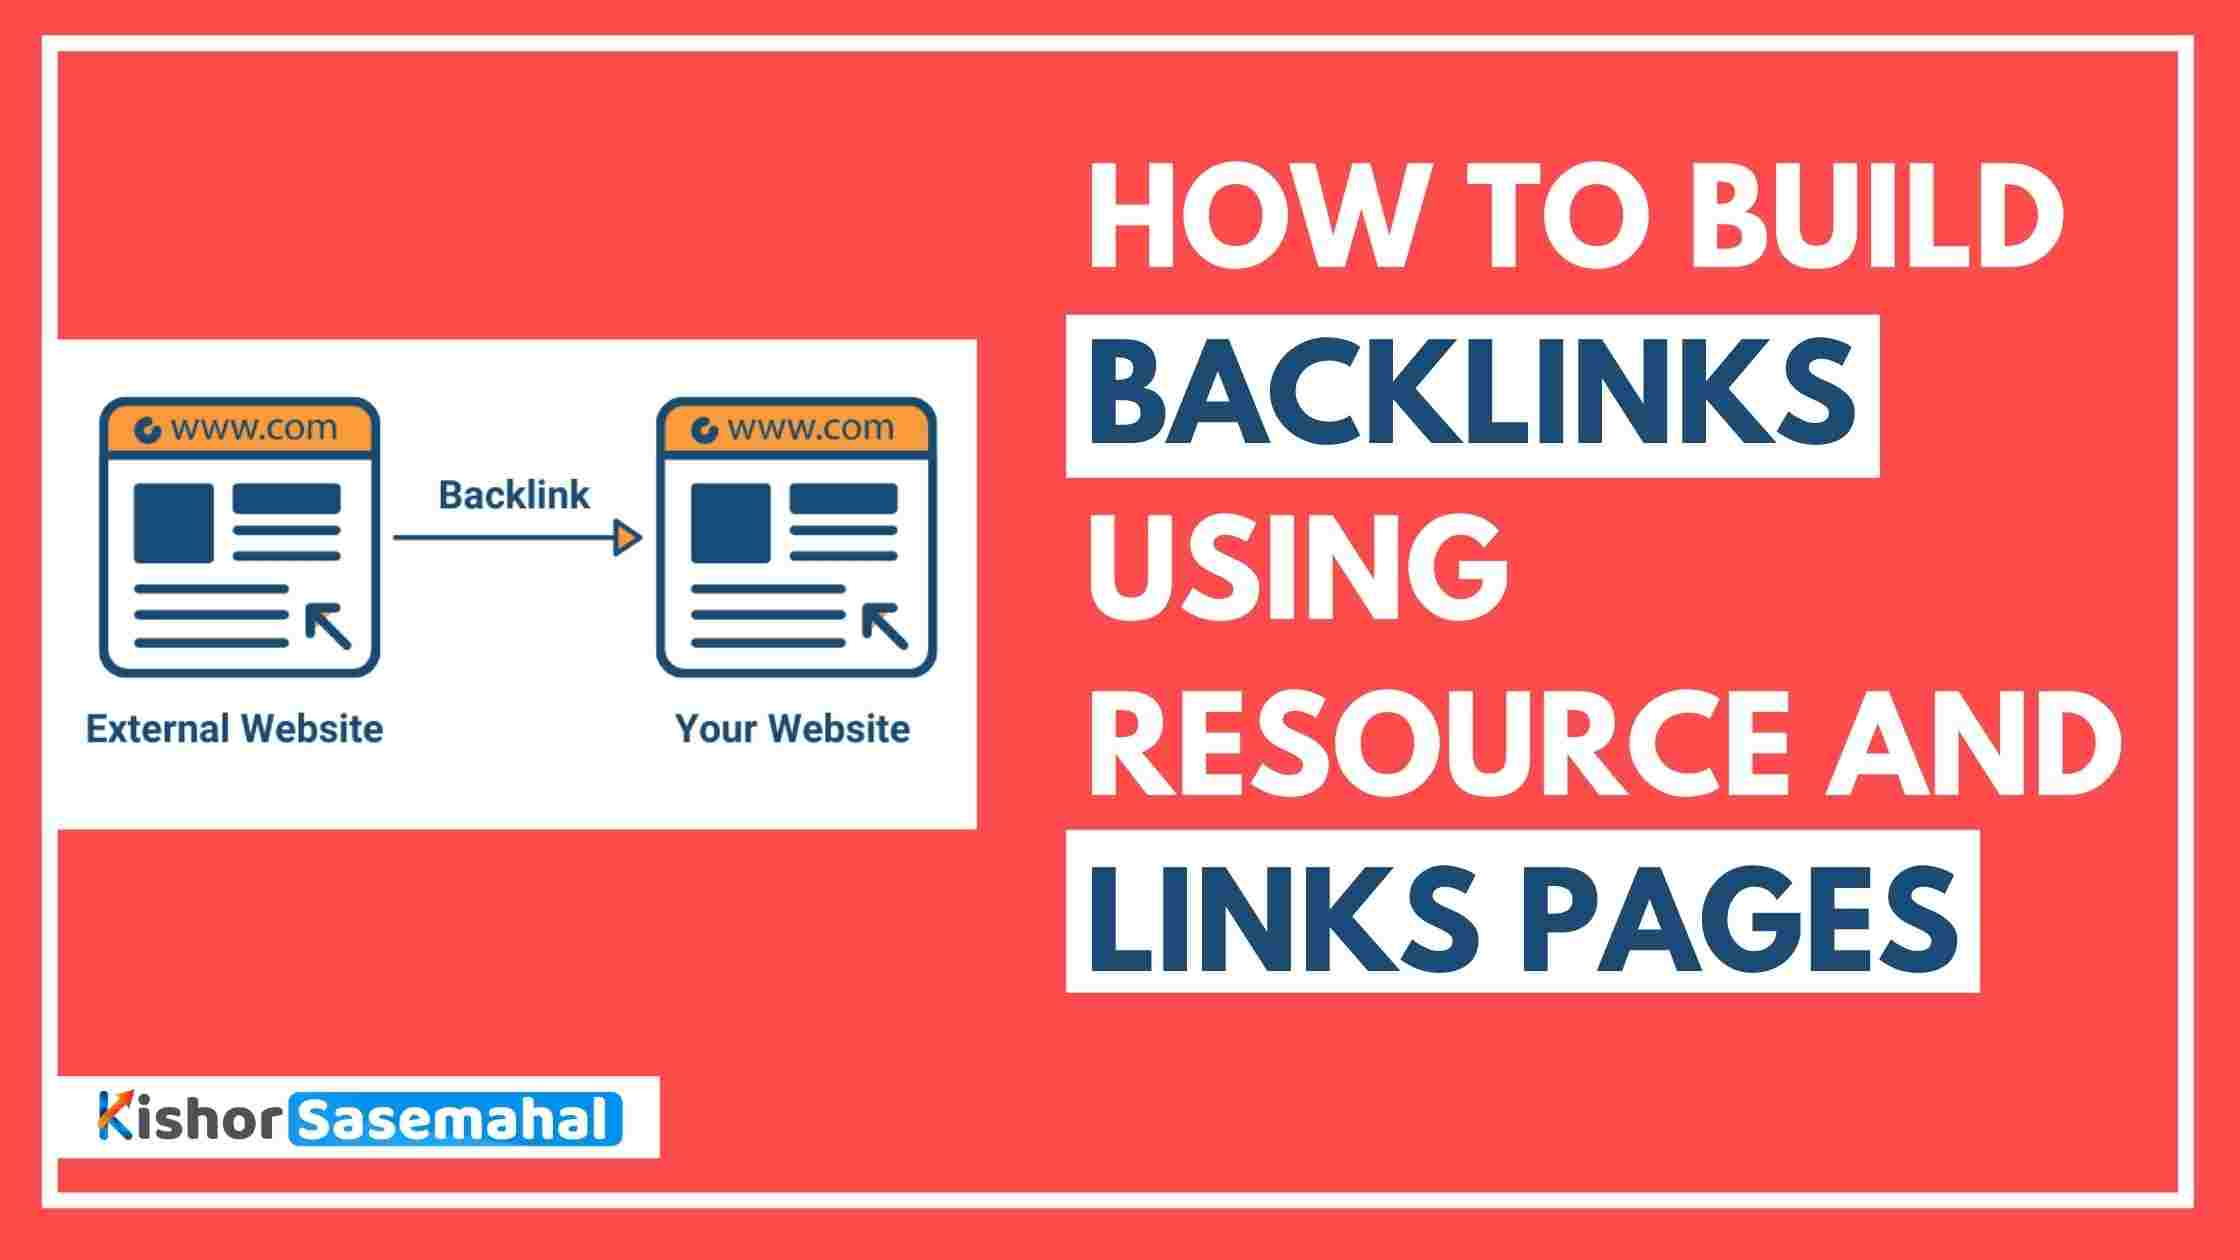 How to Build Backlinks Using Resource and Links Pages